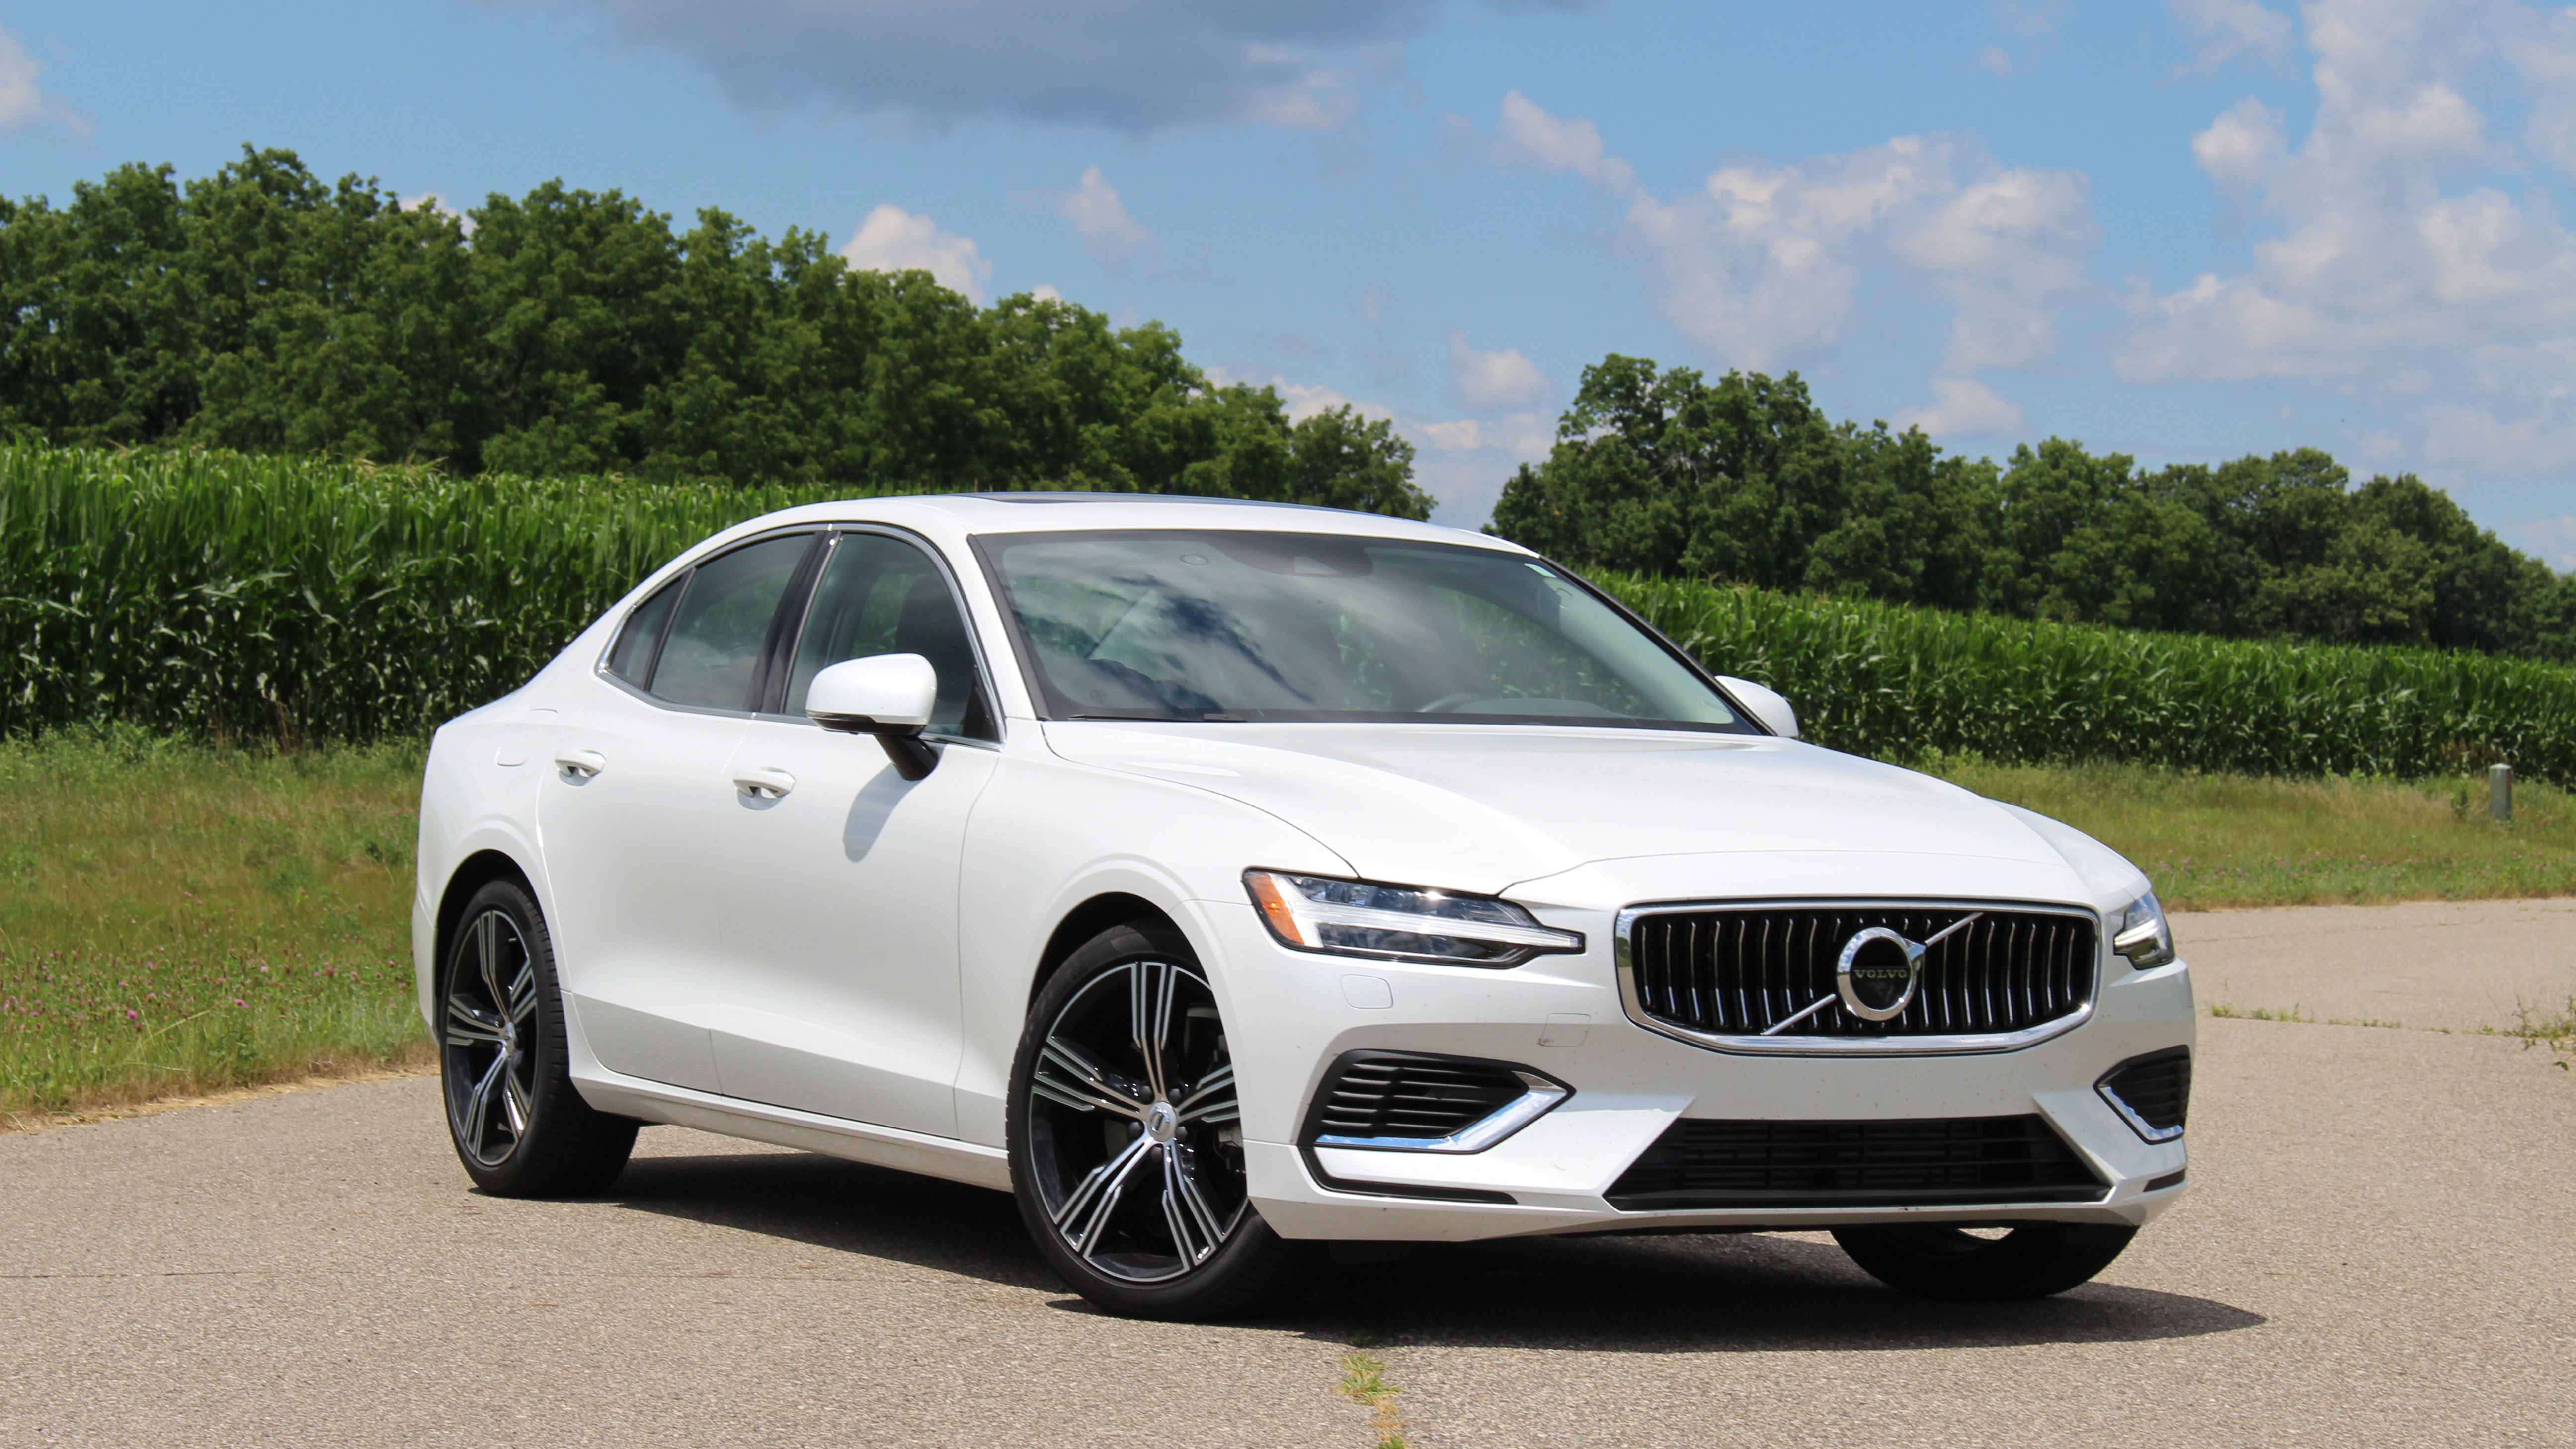 2020 Volvo S60 T8 Long-Term Update | We cross the 10,000-mile mark